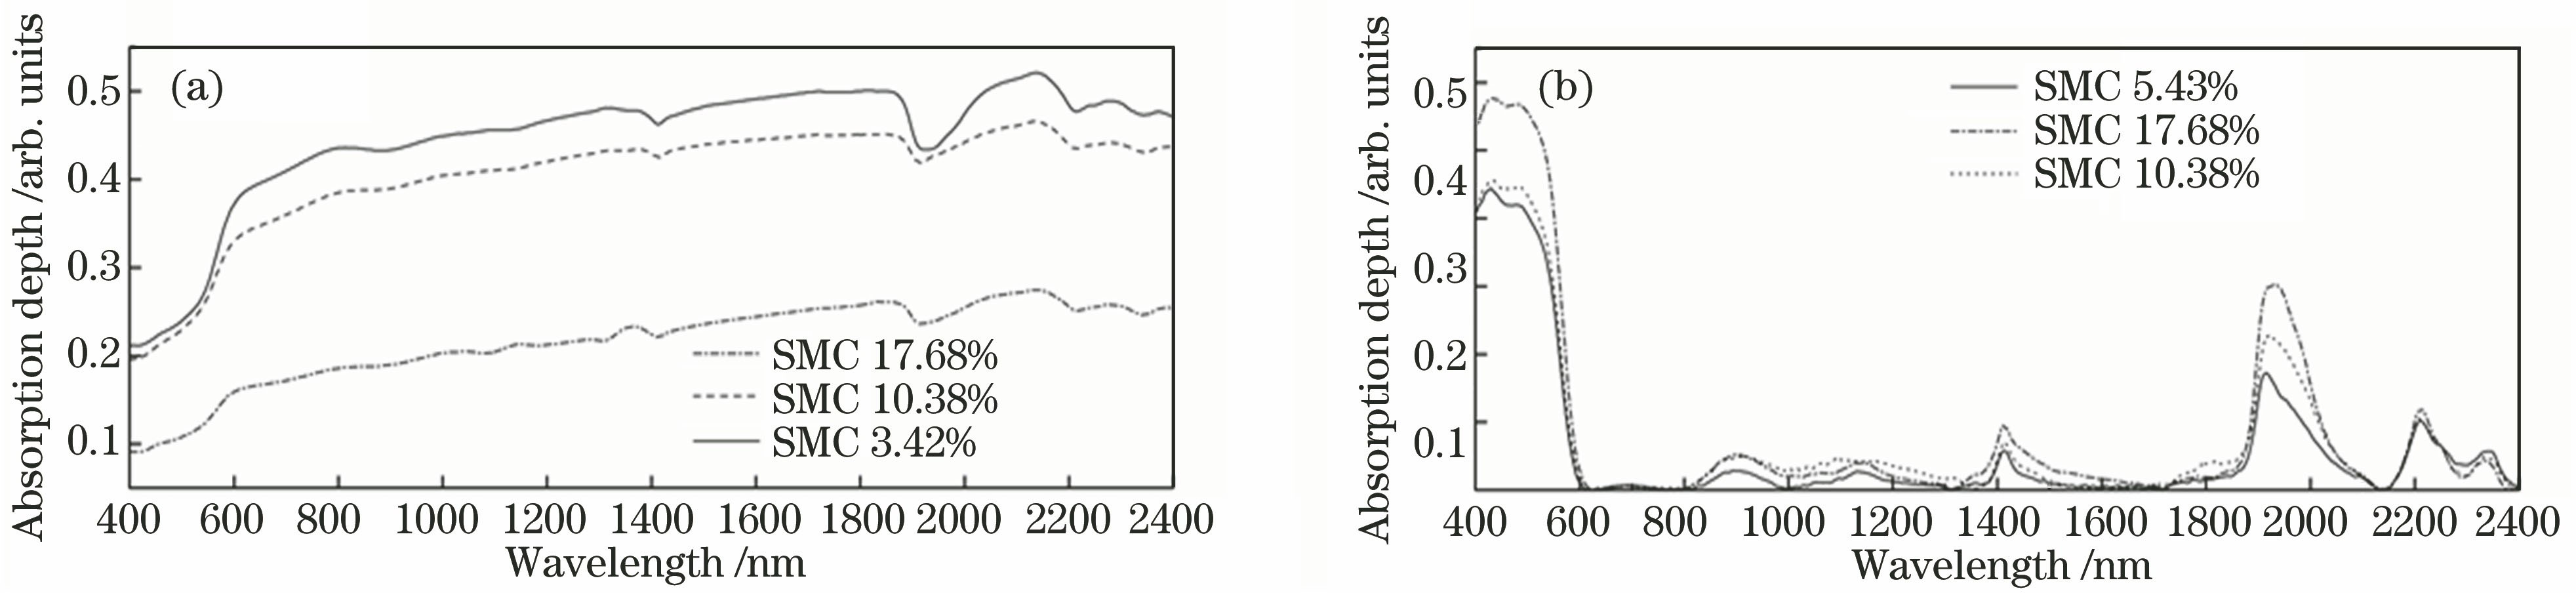 Spectral reflectance curves and spectral absorption characteristic curves of sample with different soil moisture contents. (a) Spectral reflectance curves; (b) spectral absorption characteristic curves